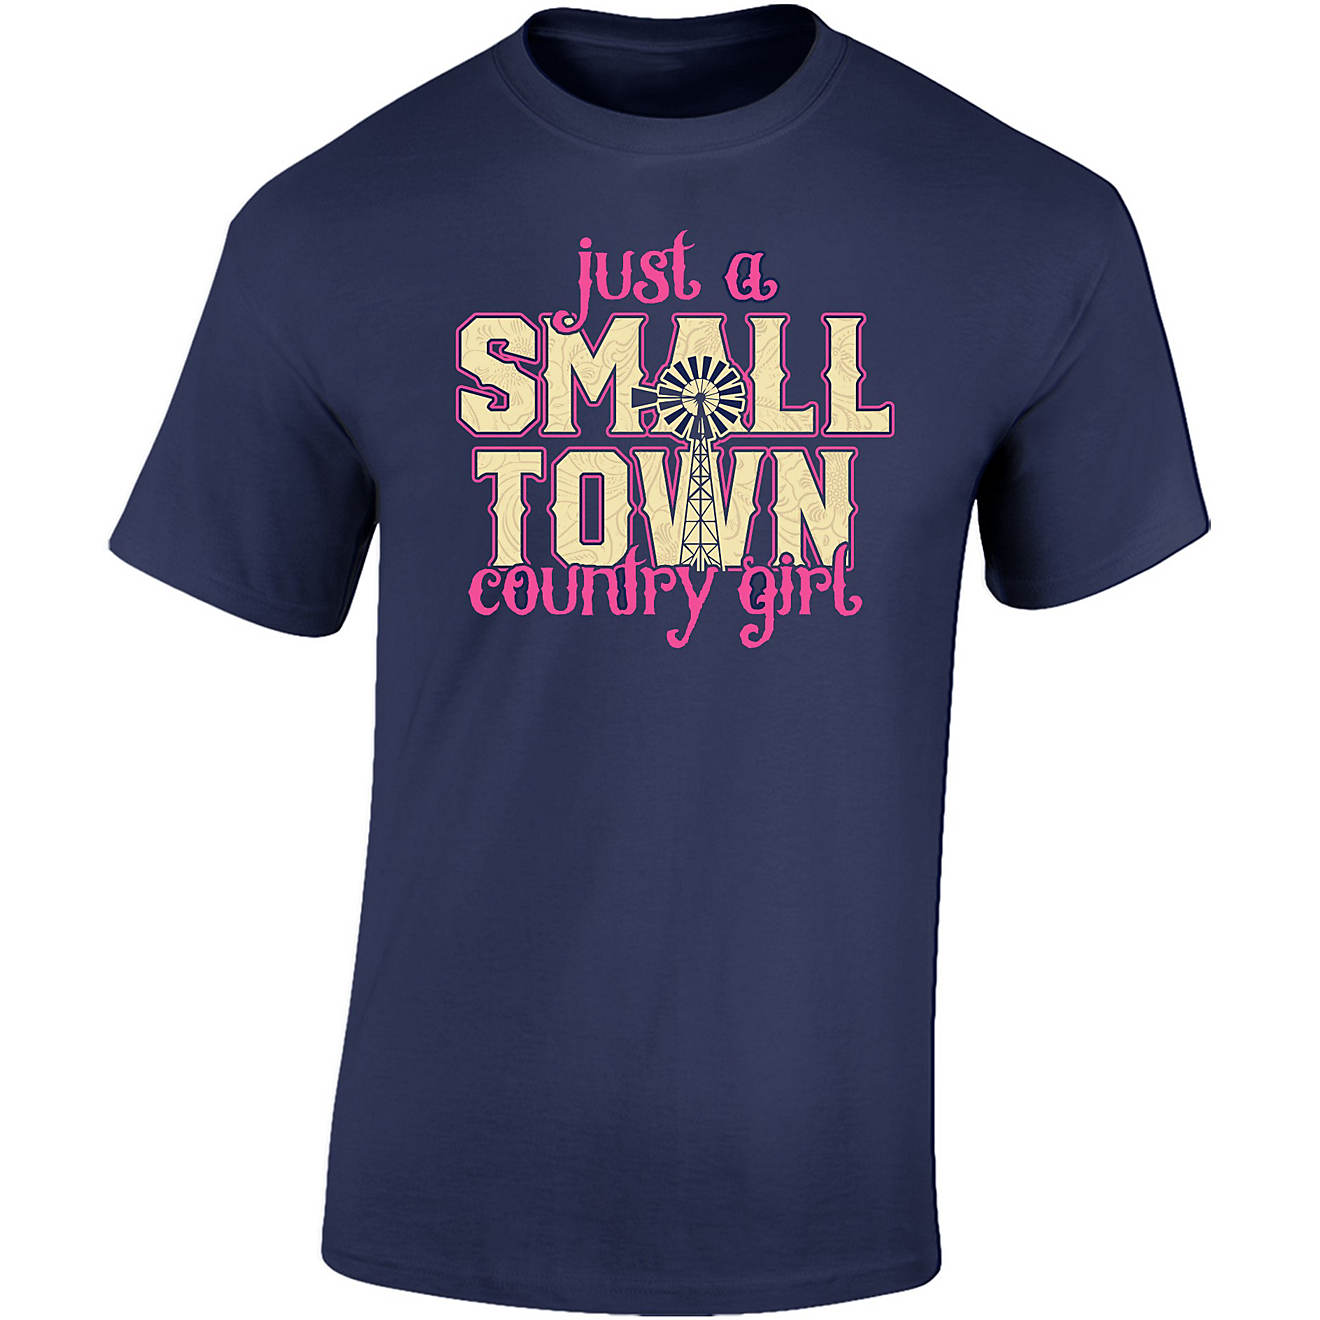 Academy Sports + Outdoors Women’s Country Girl Graphic T-shirt                                                                 - view number 1